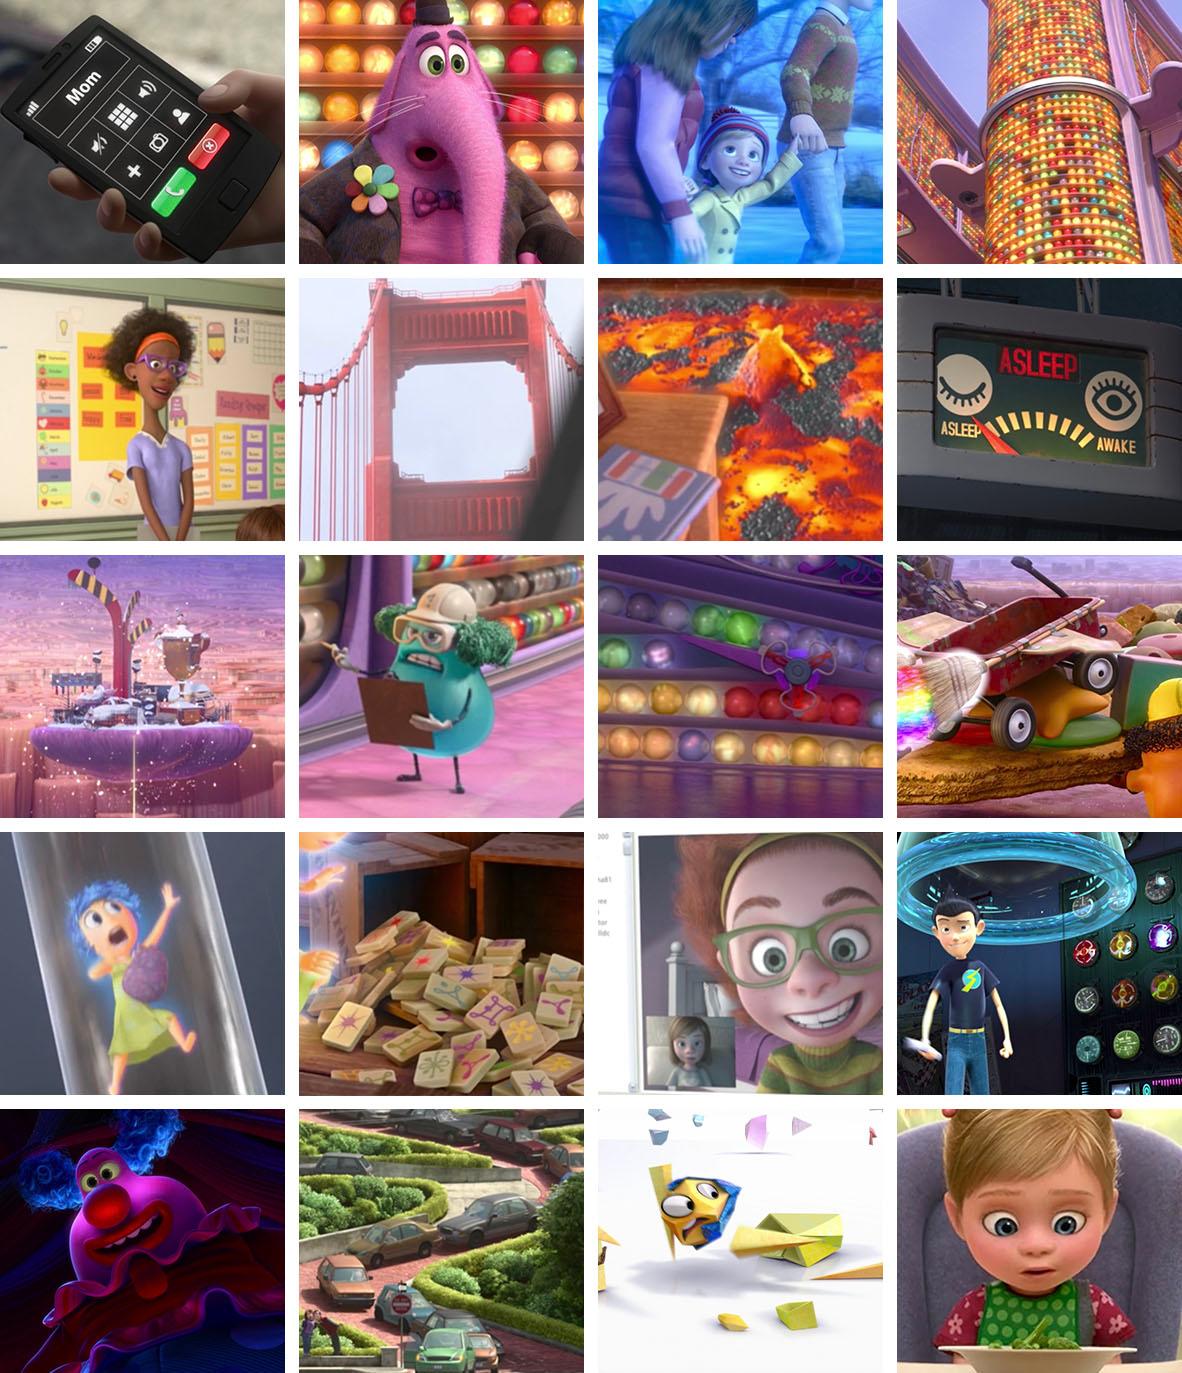 19 pictures from &quot;Inside Out&quot; and one picture from &quot;Meet the Robinsons&quot;